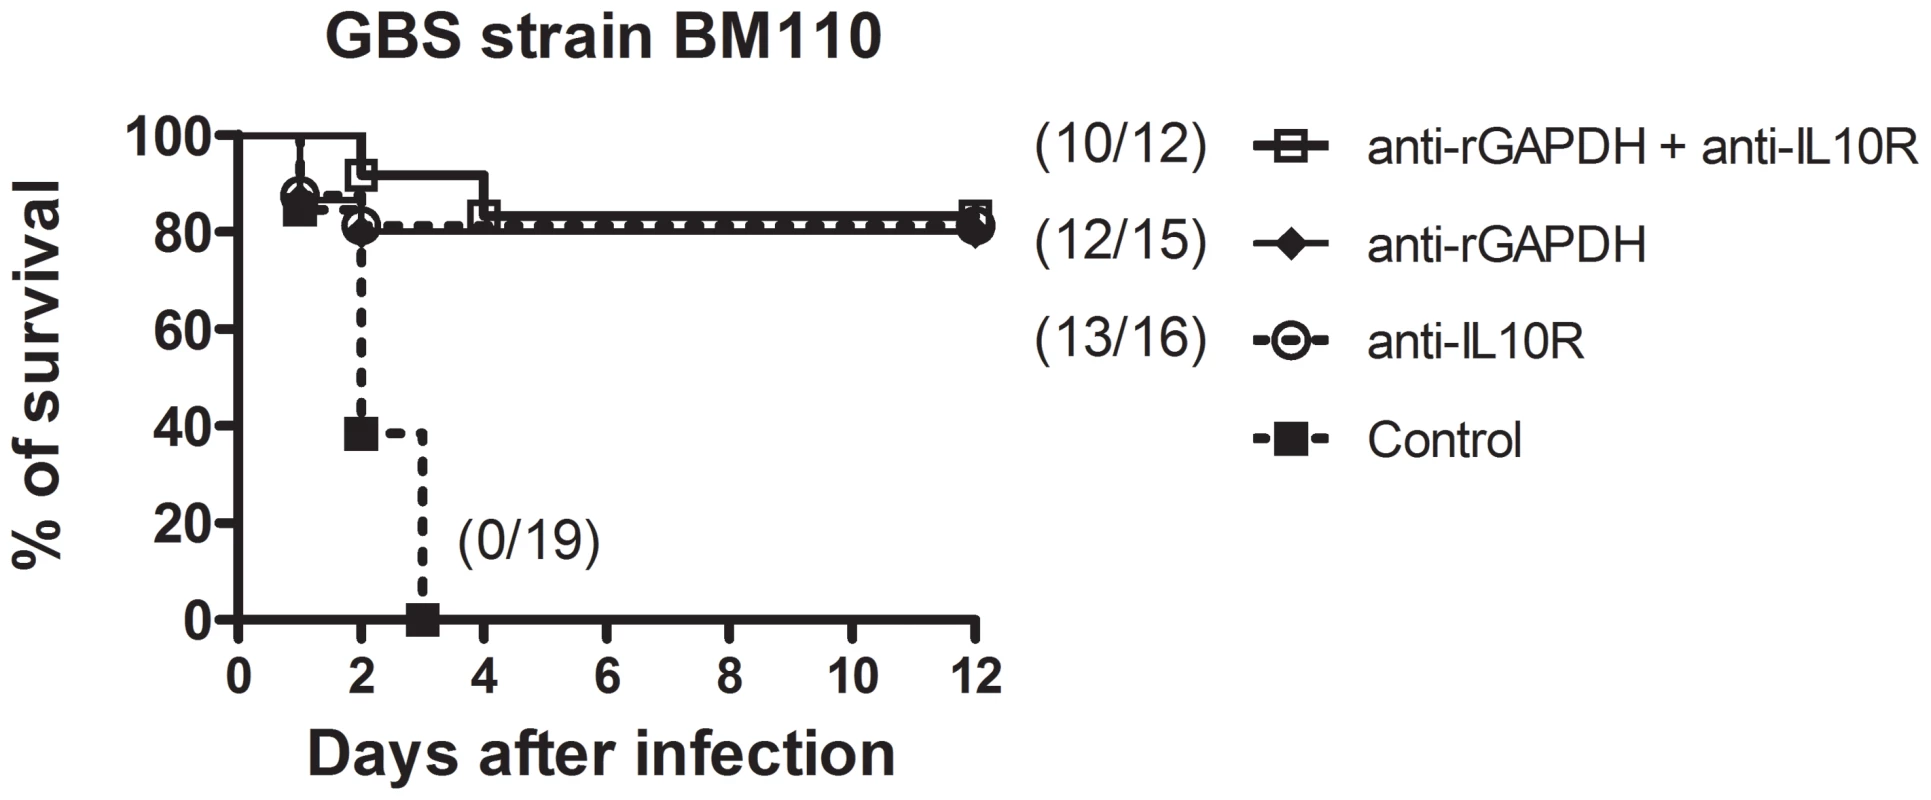 Simultaneous injection of anti-rGAPDH IgG's and anti-IL10R mAb does not increase survival of newborn mice infected with GBS BM110.